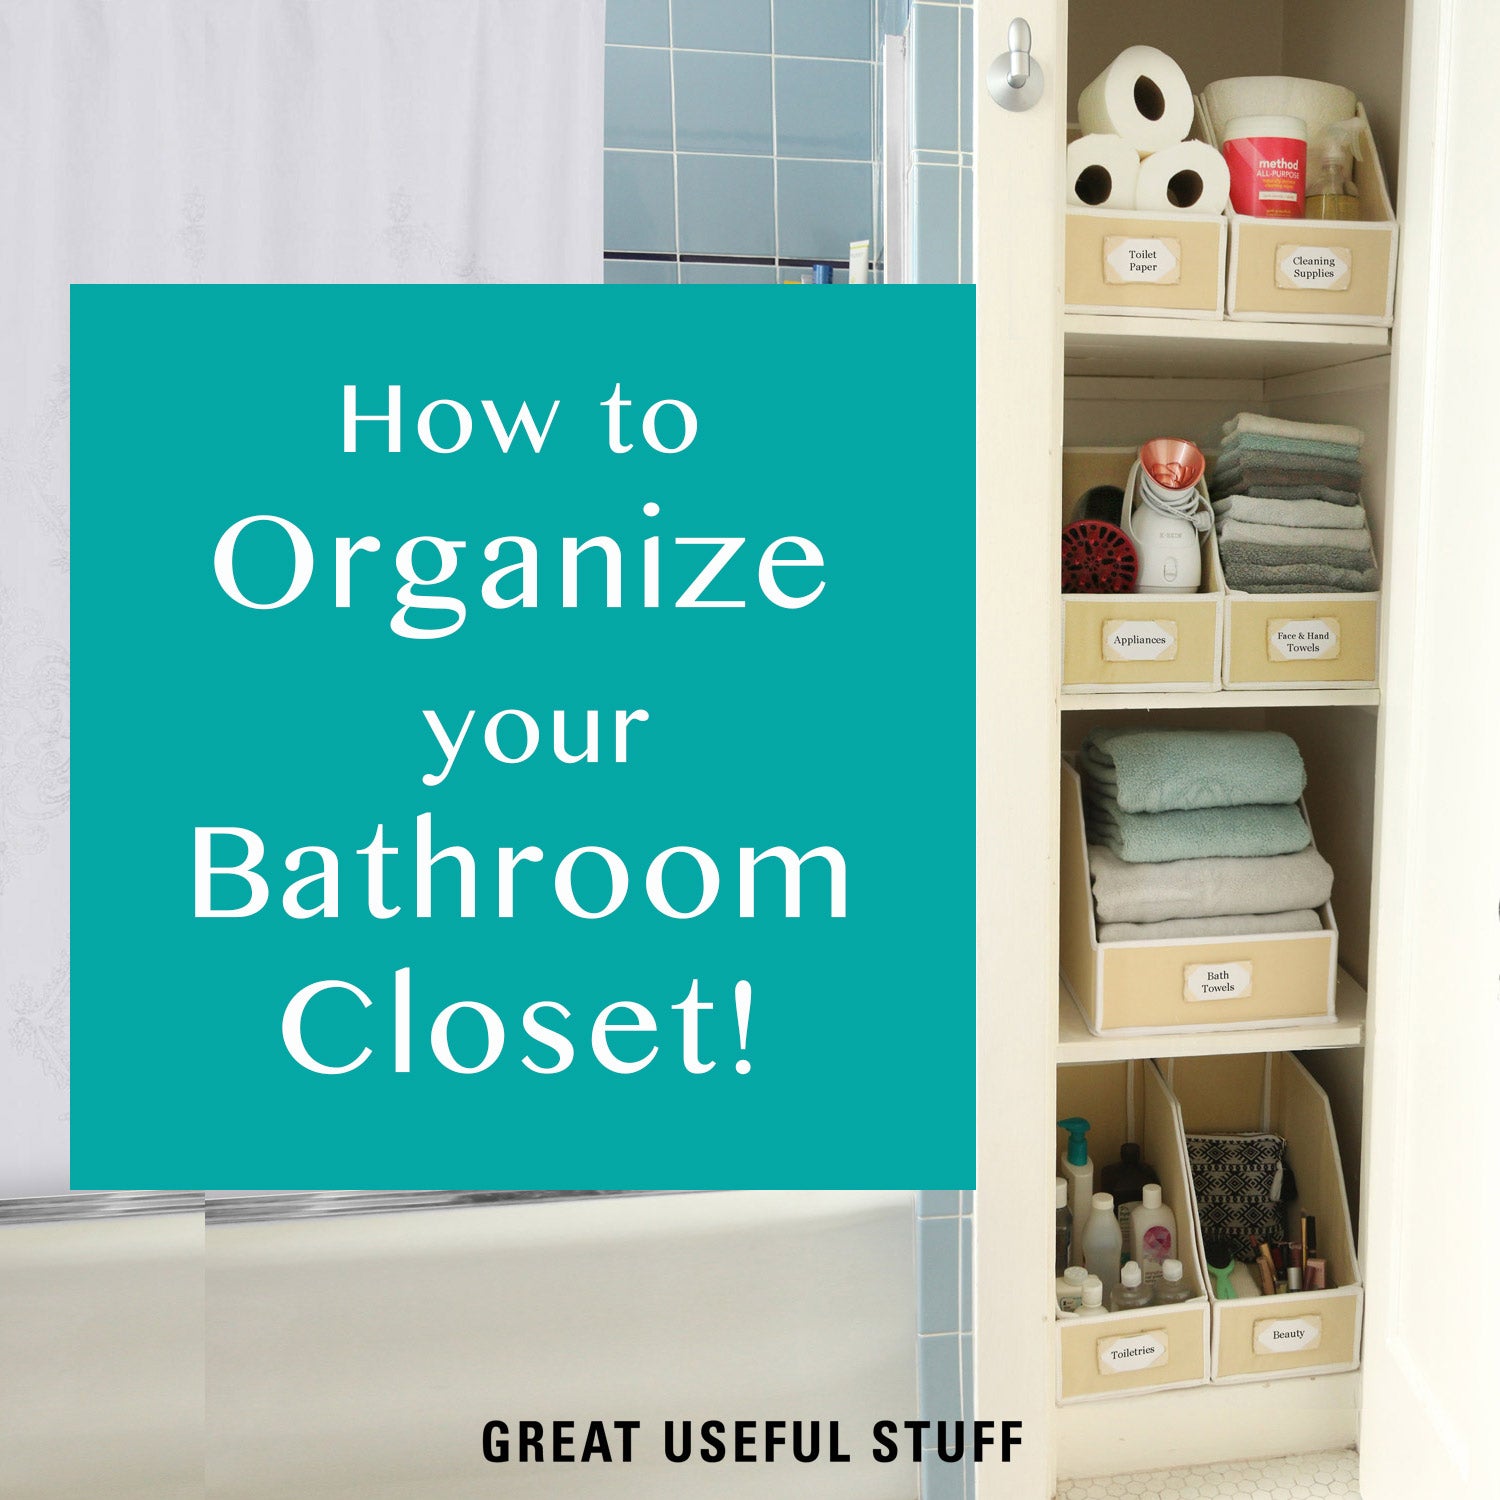 How to Organize your Bathroom Closet – Great Useful Stuff